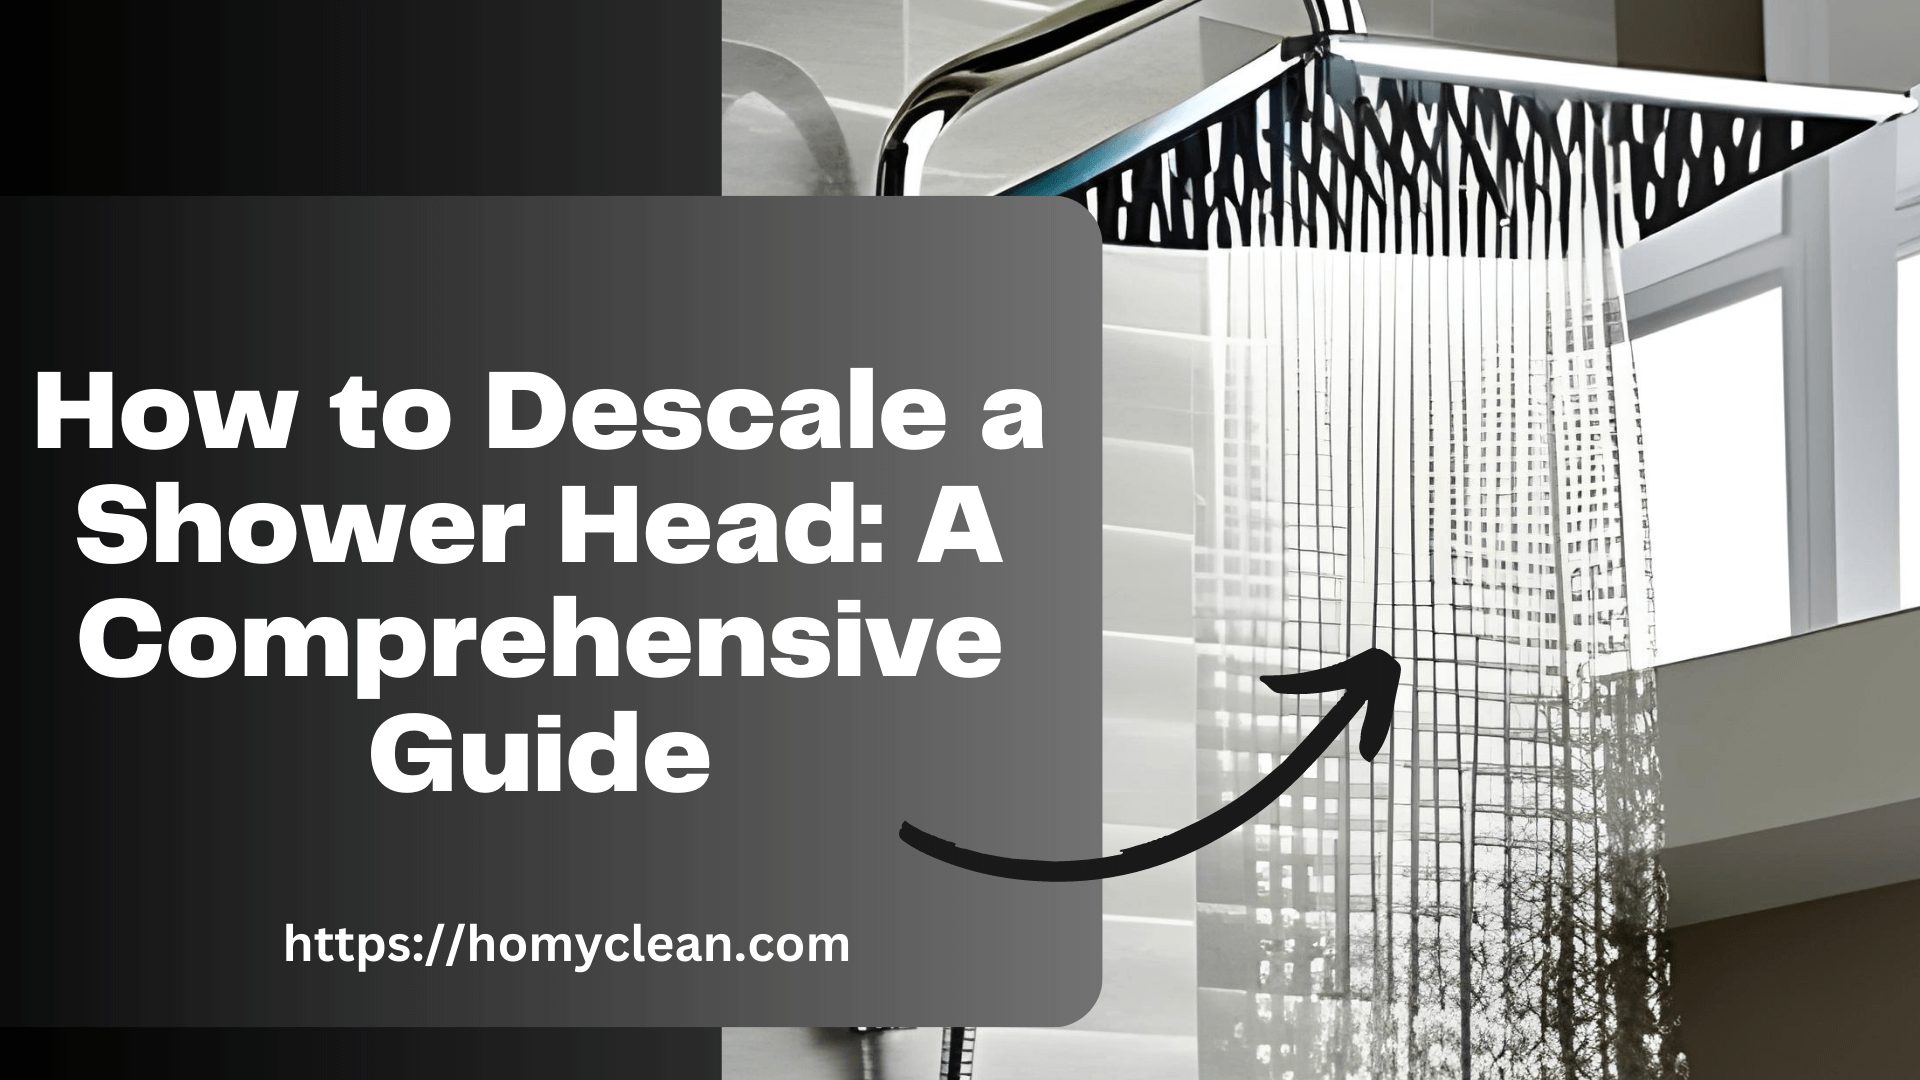 How to Descale Shower Head: A Comprehensive Guide